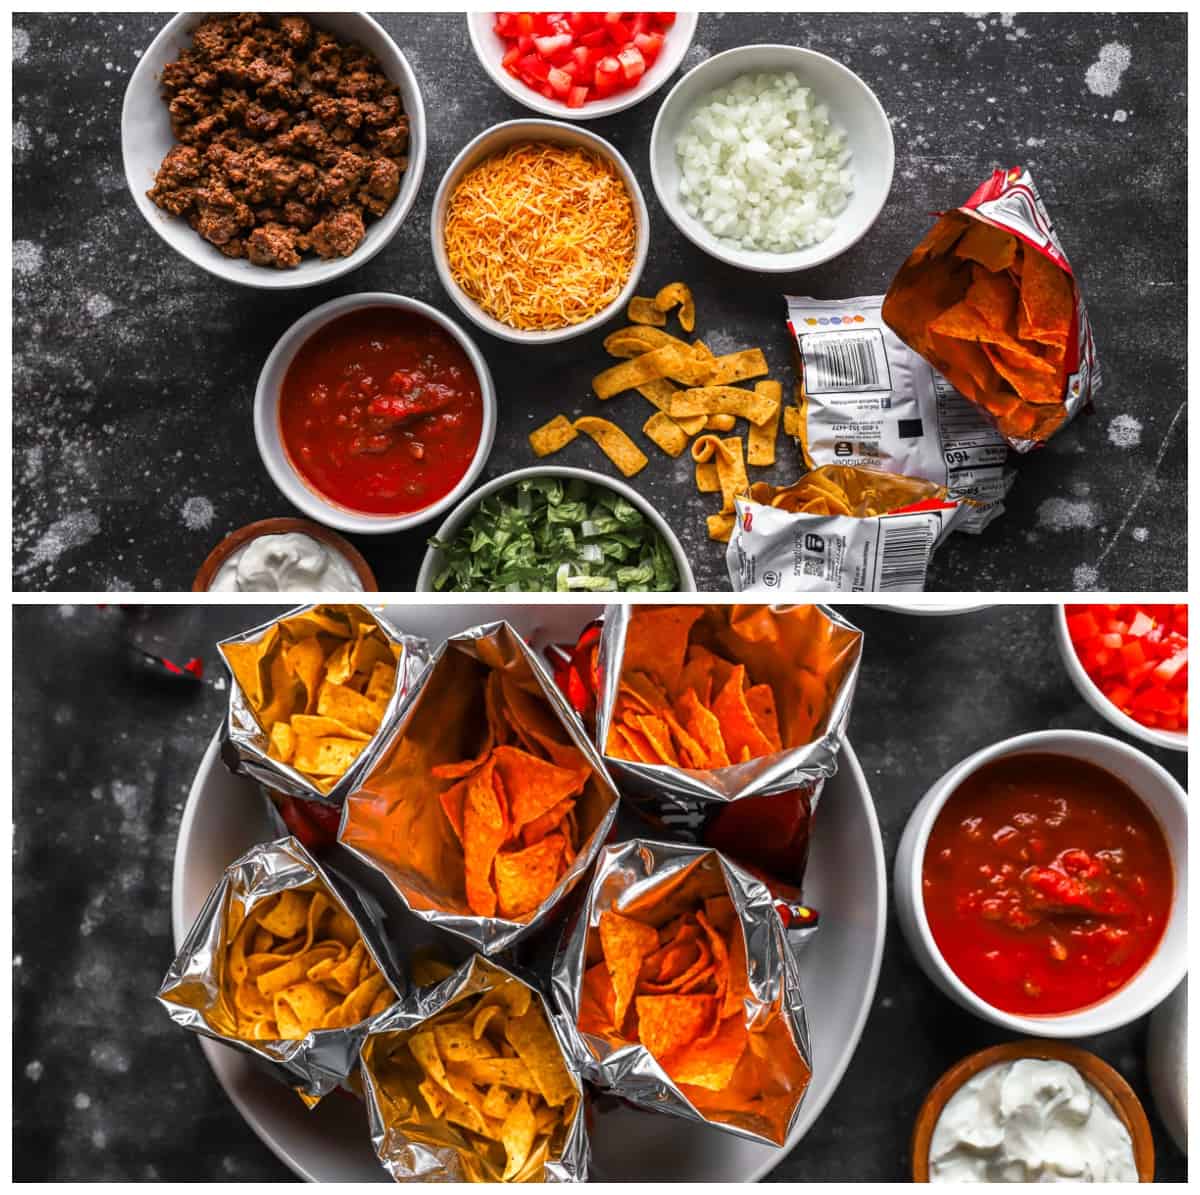 a series of photos showing the ingredients to make walkings tacos; bags of Fritos and Doritos, and taco toppings.